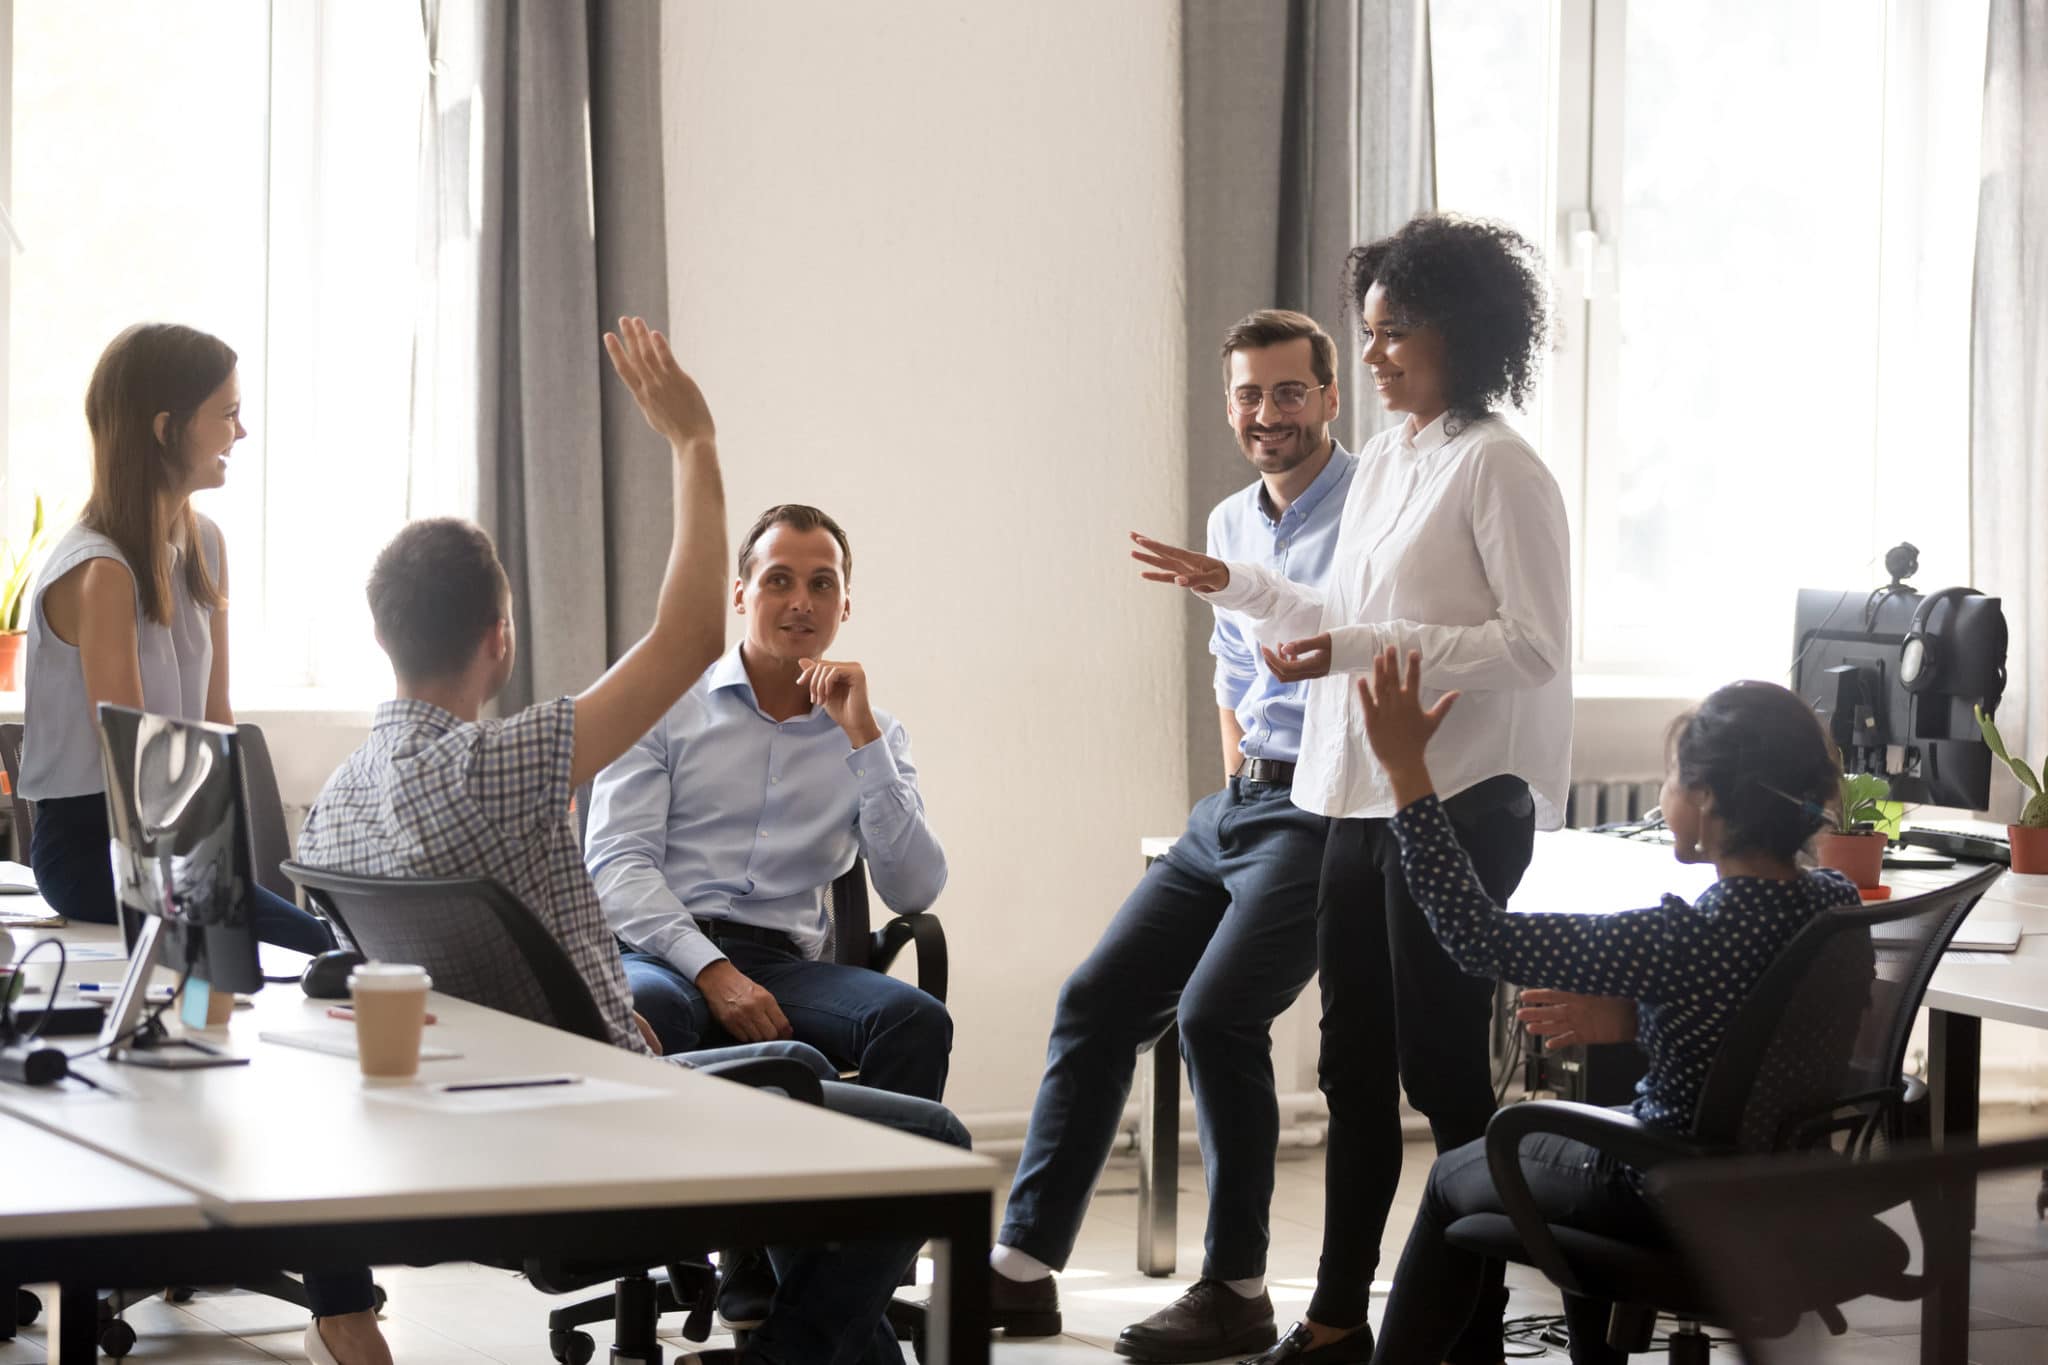 7 Ways to Increase Group Cohesion in Any Workplace
